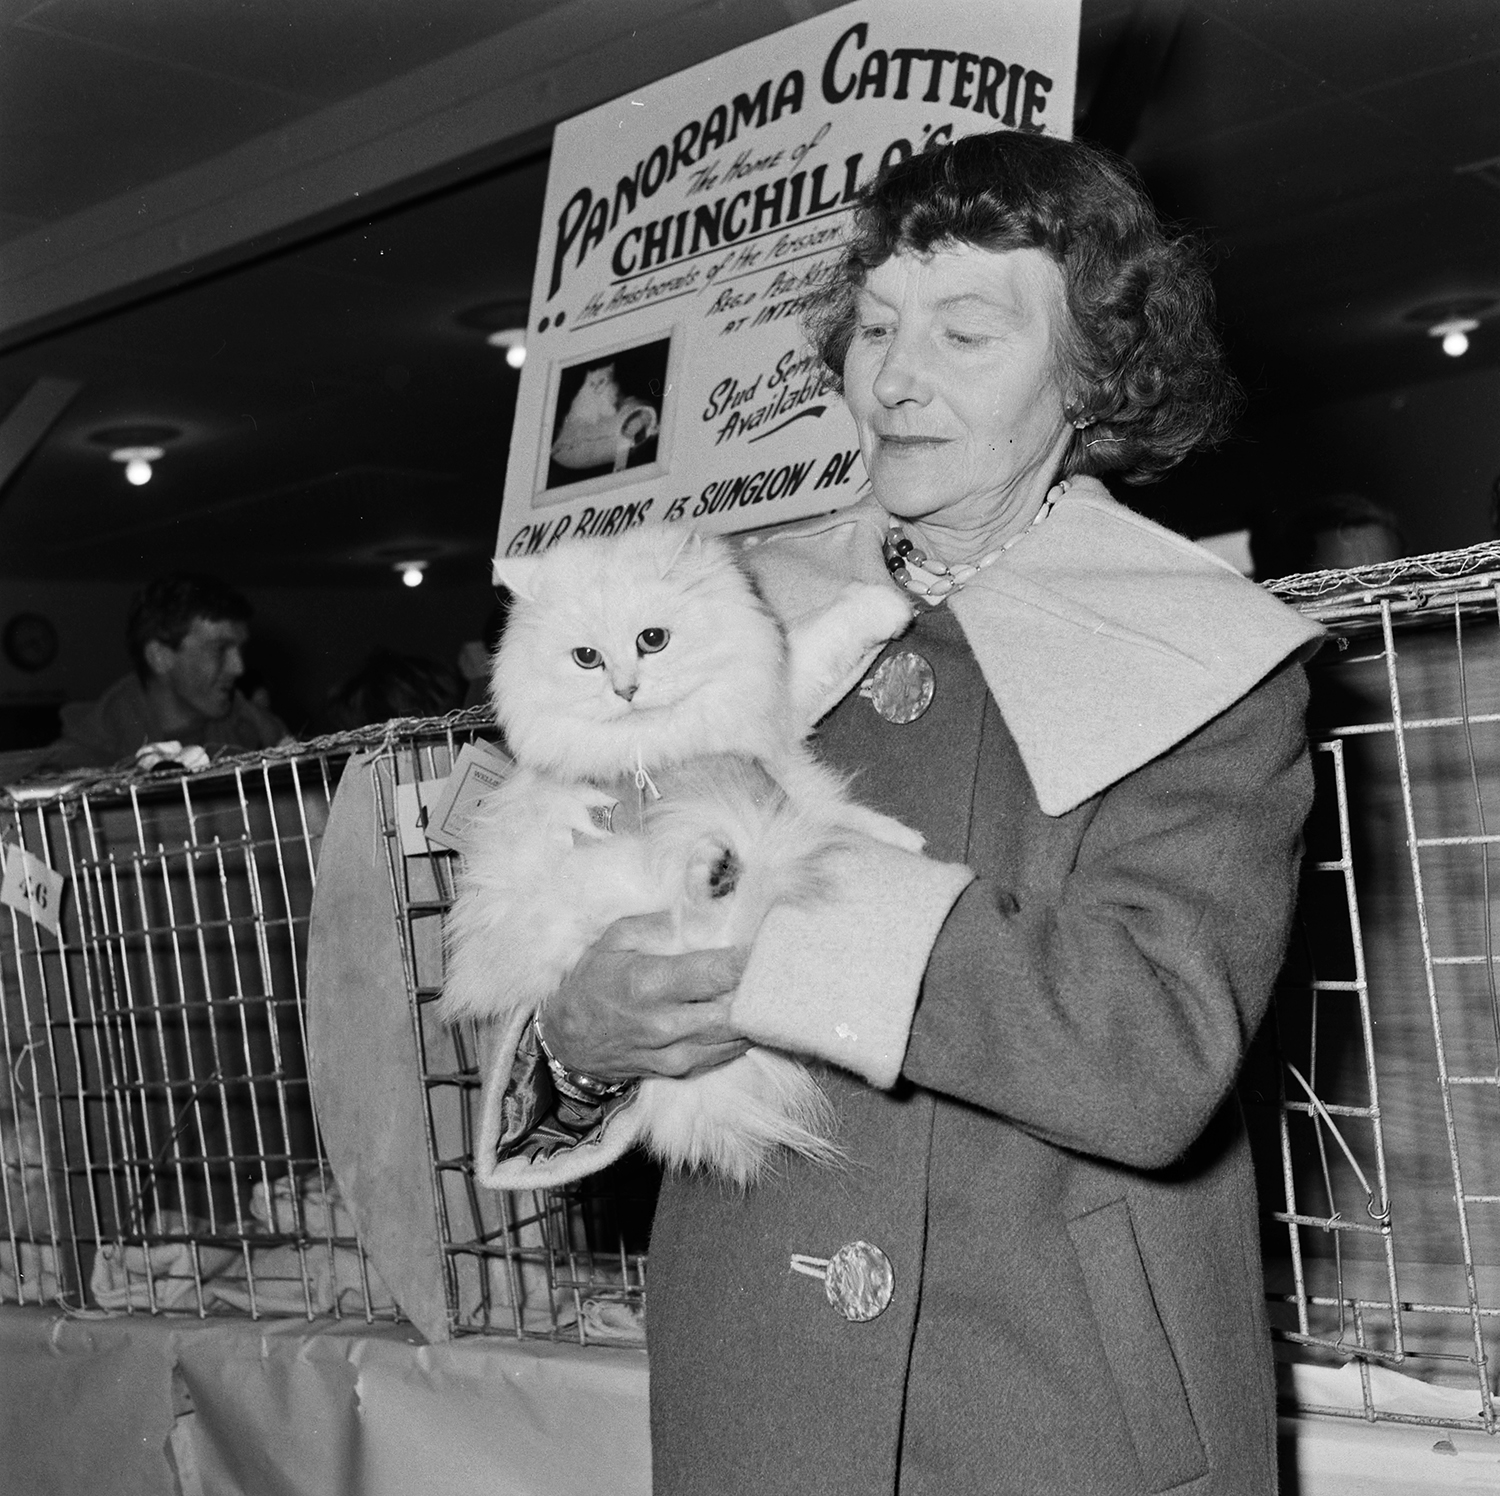 A black and white photo of a woman holding a cat at a cat show.